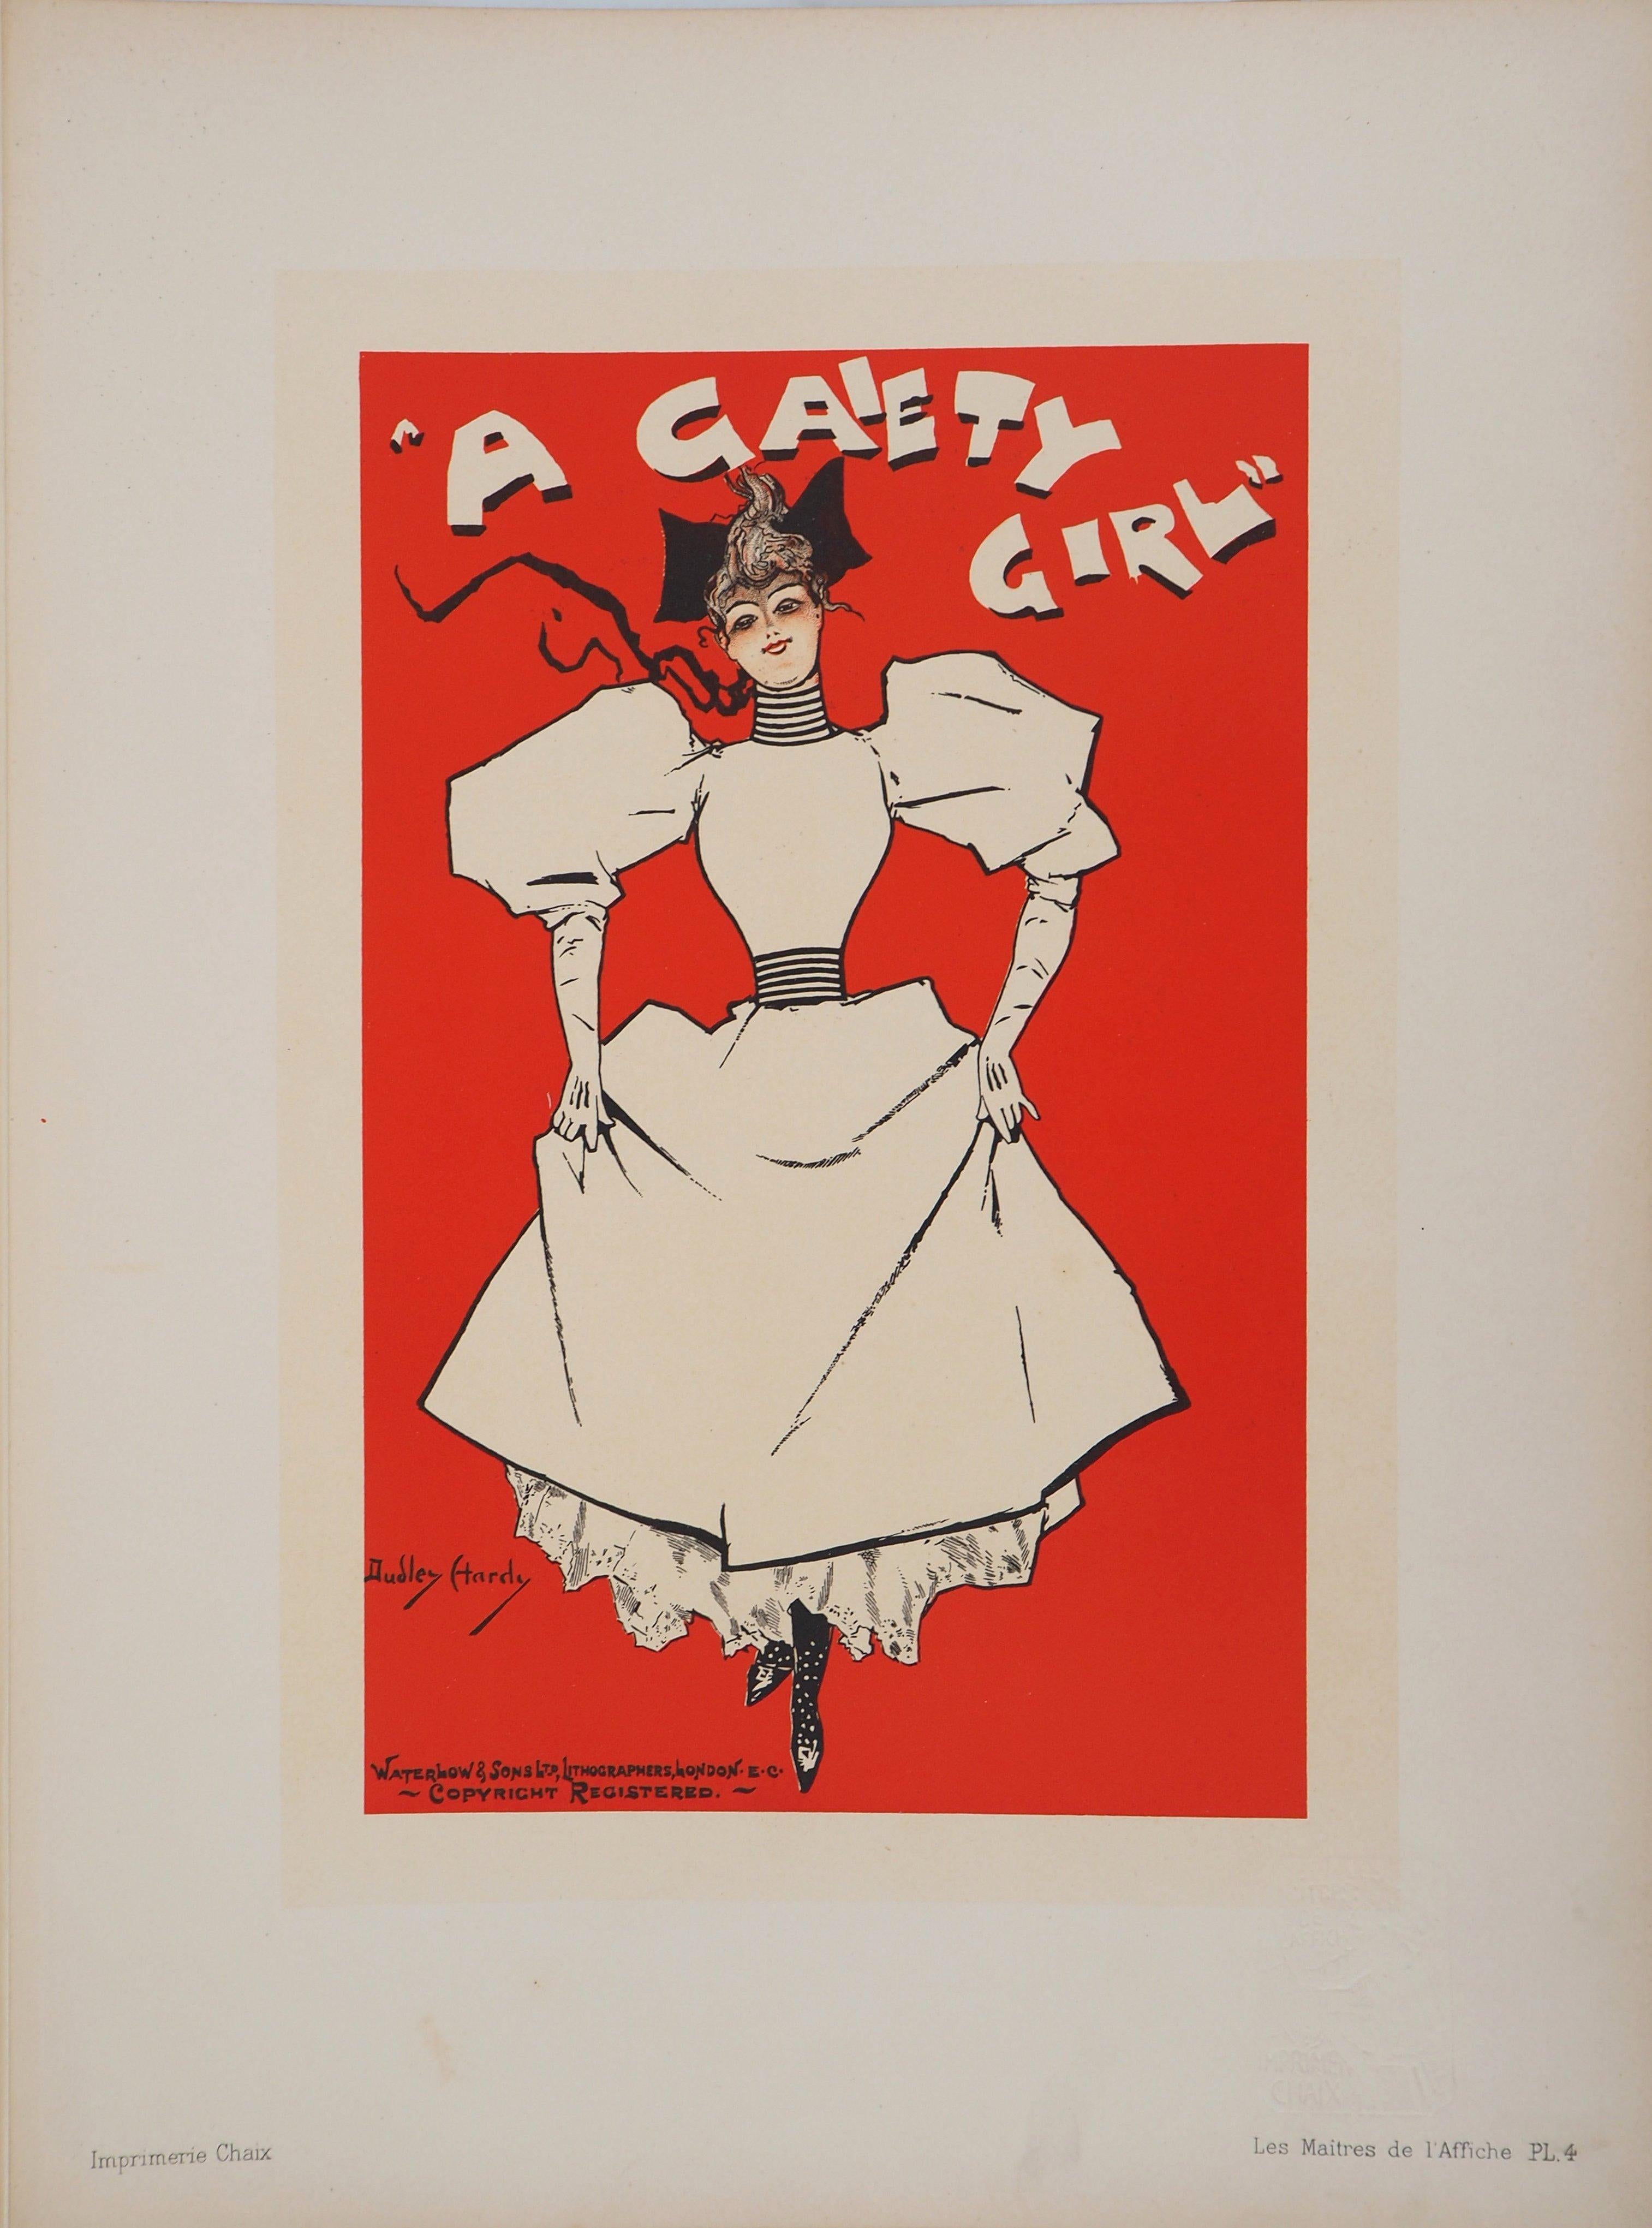 Gaiety Girl - Lithograph (Les Maîtres de l'Affiche), 1895 - Print by Dudley Hardy